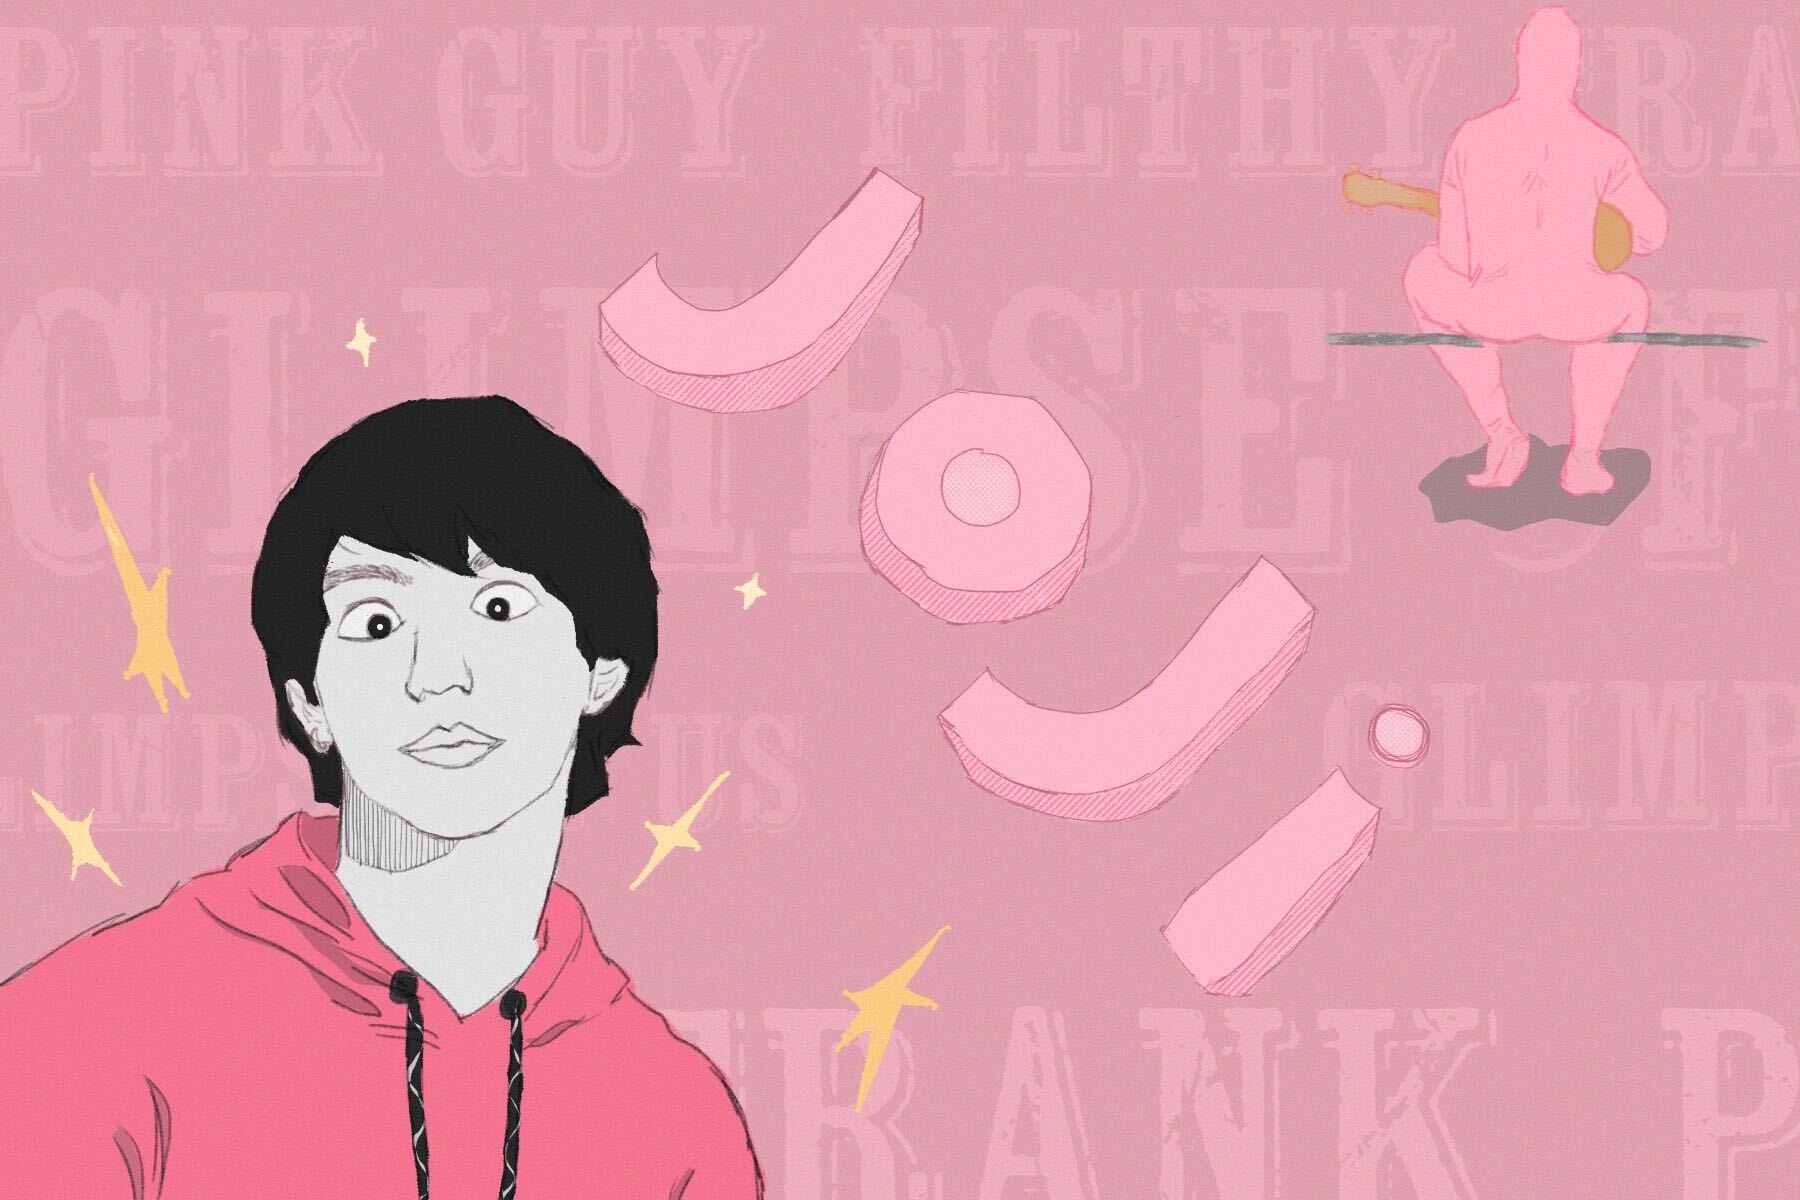 In an article about Joji, an image of his former "Pink Guy" persona on a lighter pink background.